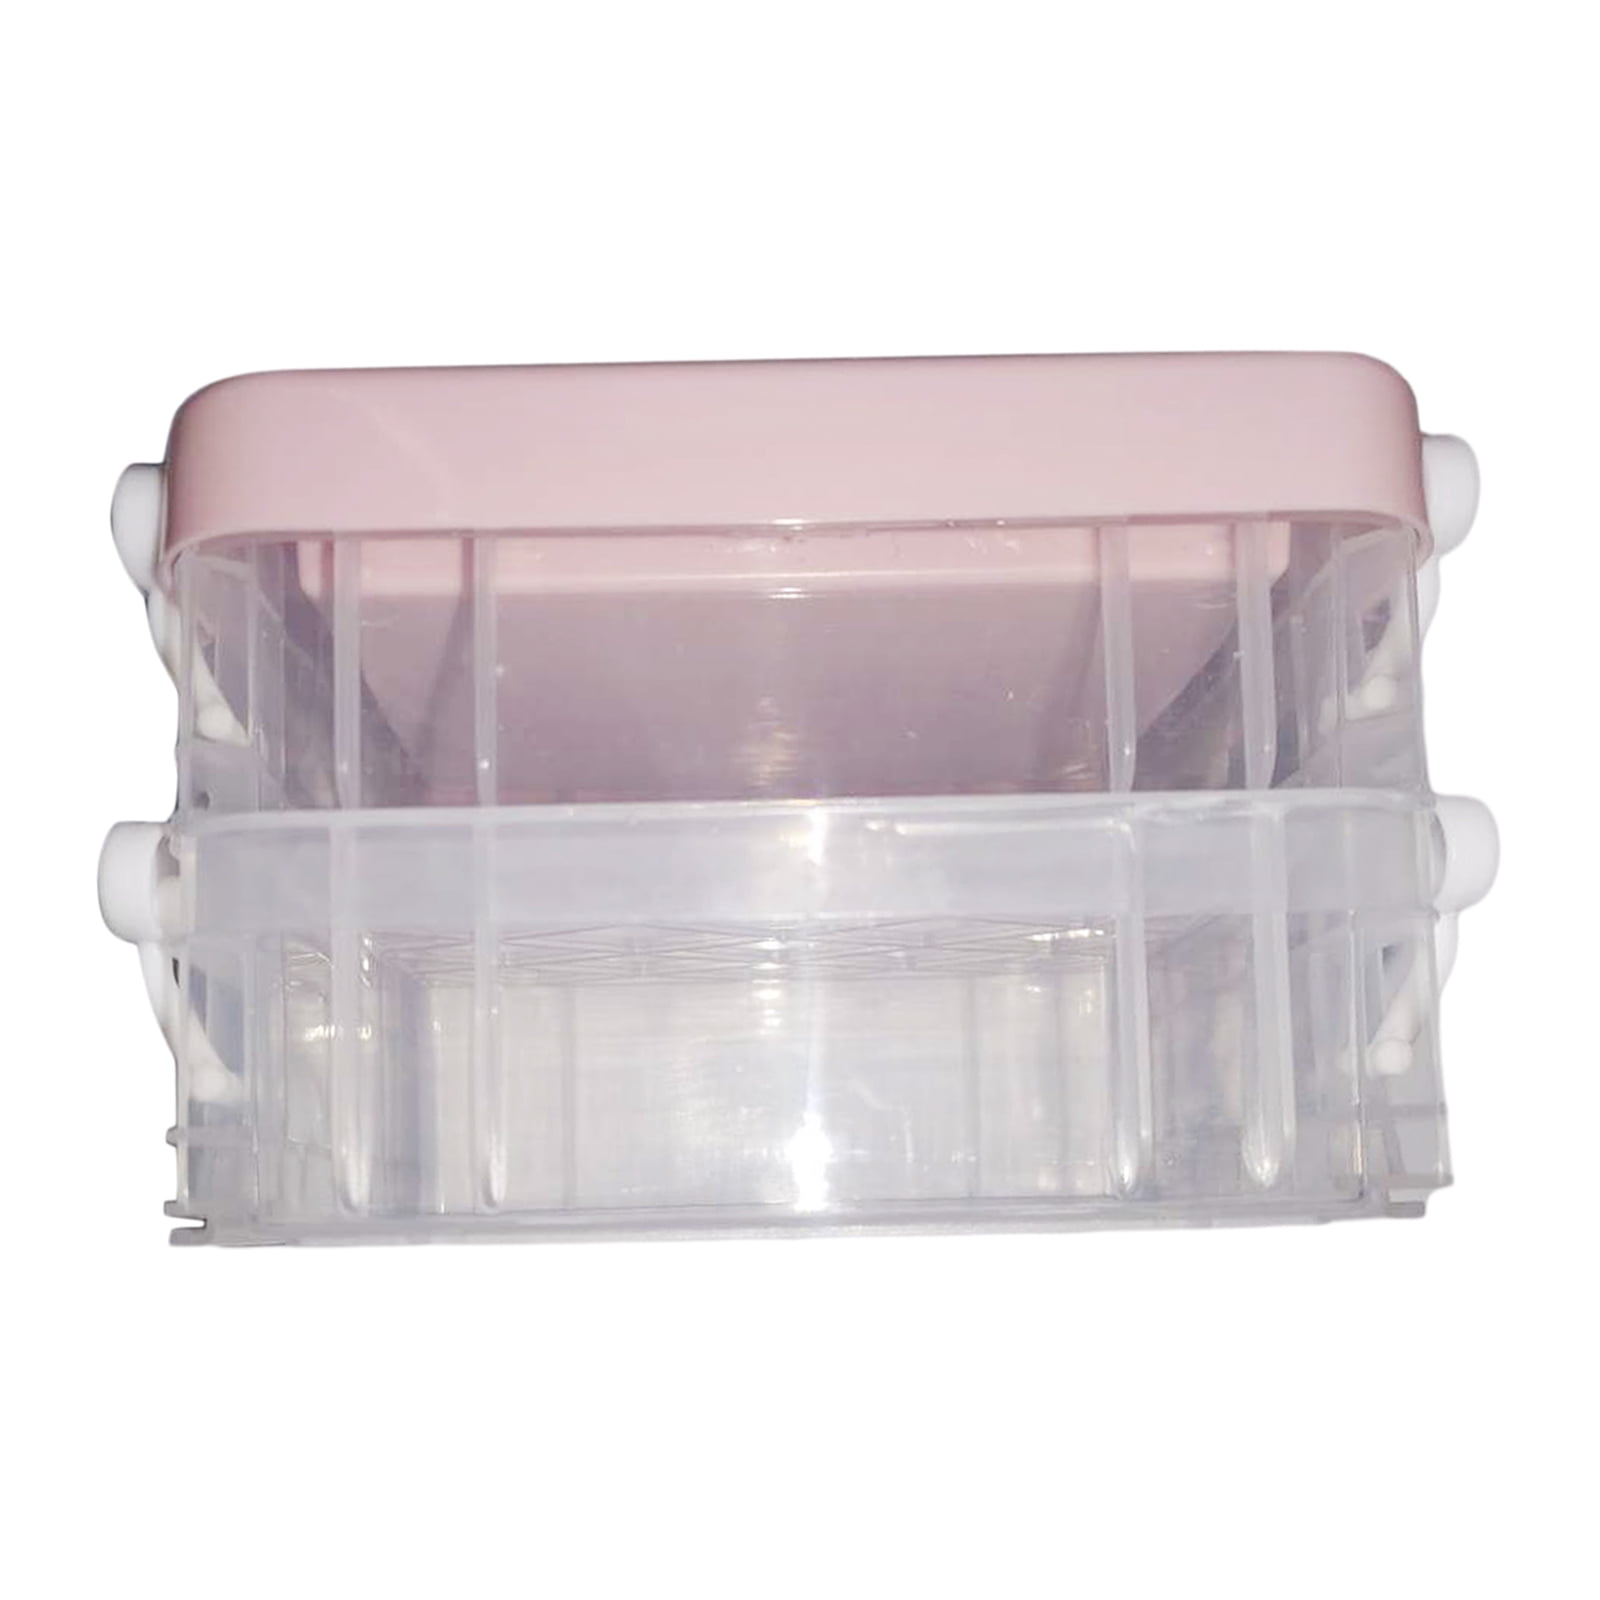 Transparent Storage Box Sewing Thread Spools Container Case Organizer Home